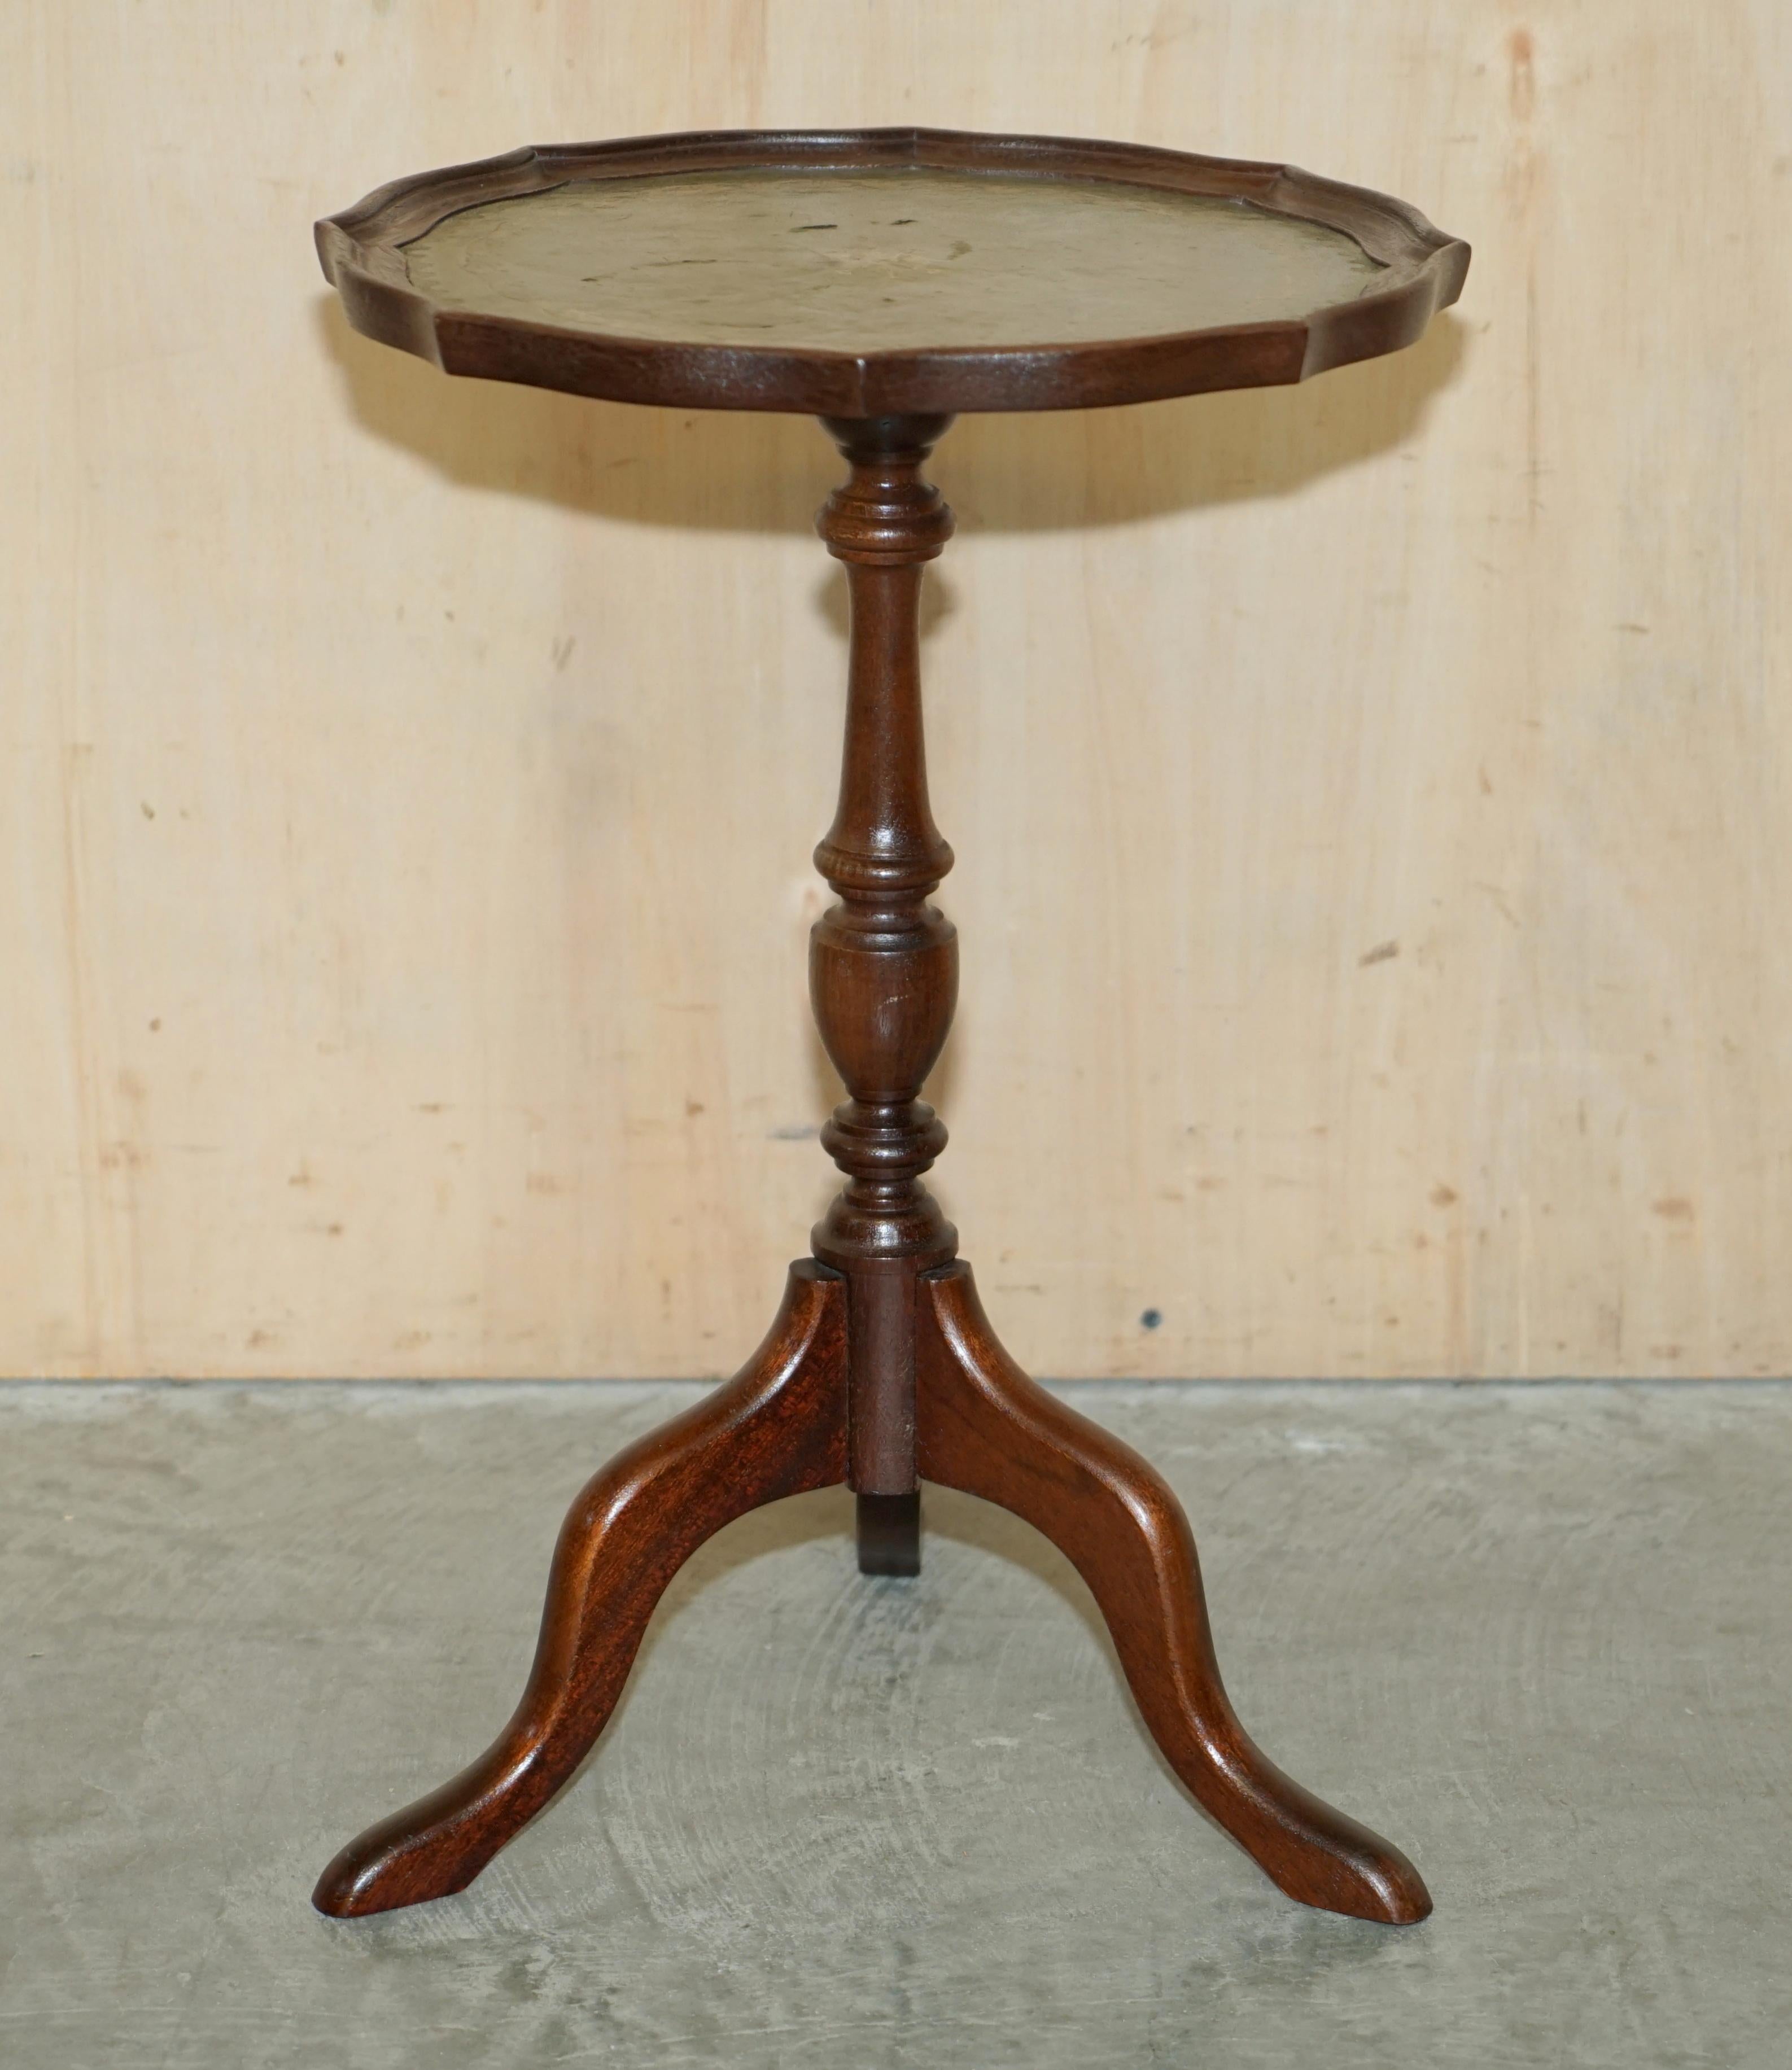 We are delighted to offer for sale this lovely vintage green leather topped lamp or side table with gold leaf inlaid boarder 

A good-looking well-made tripod table in good, we have cleaned waxed and polished it from top to bottom, there will be